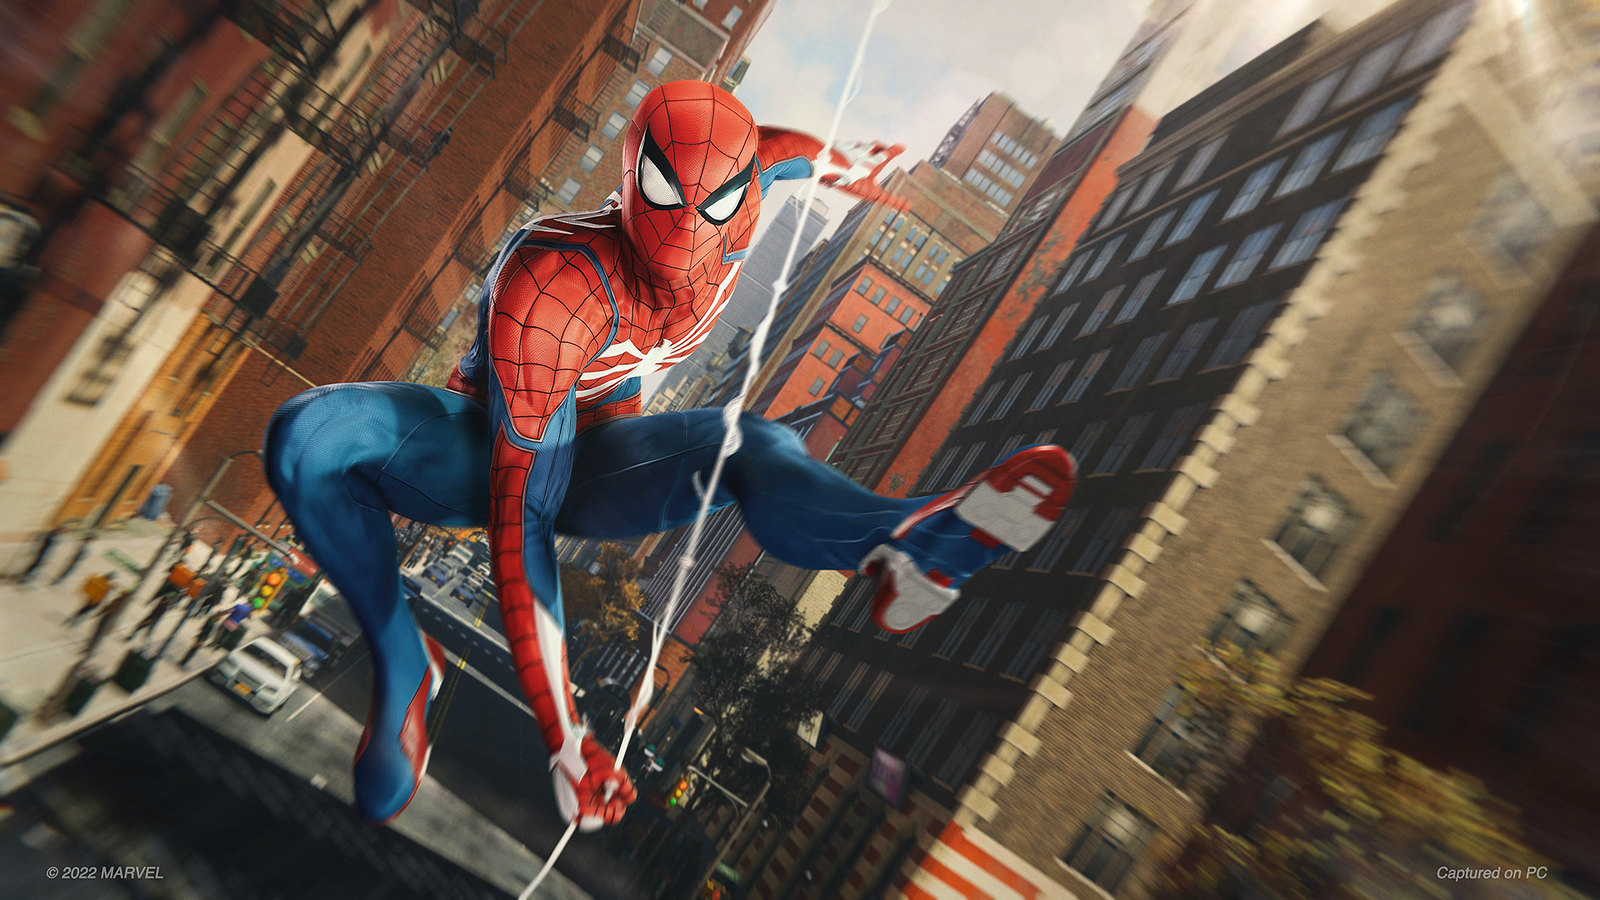 Marvel's Spider-Man 2 Sells More Than 5 Million Copies in 11 Days - IGN